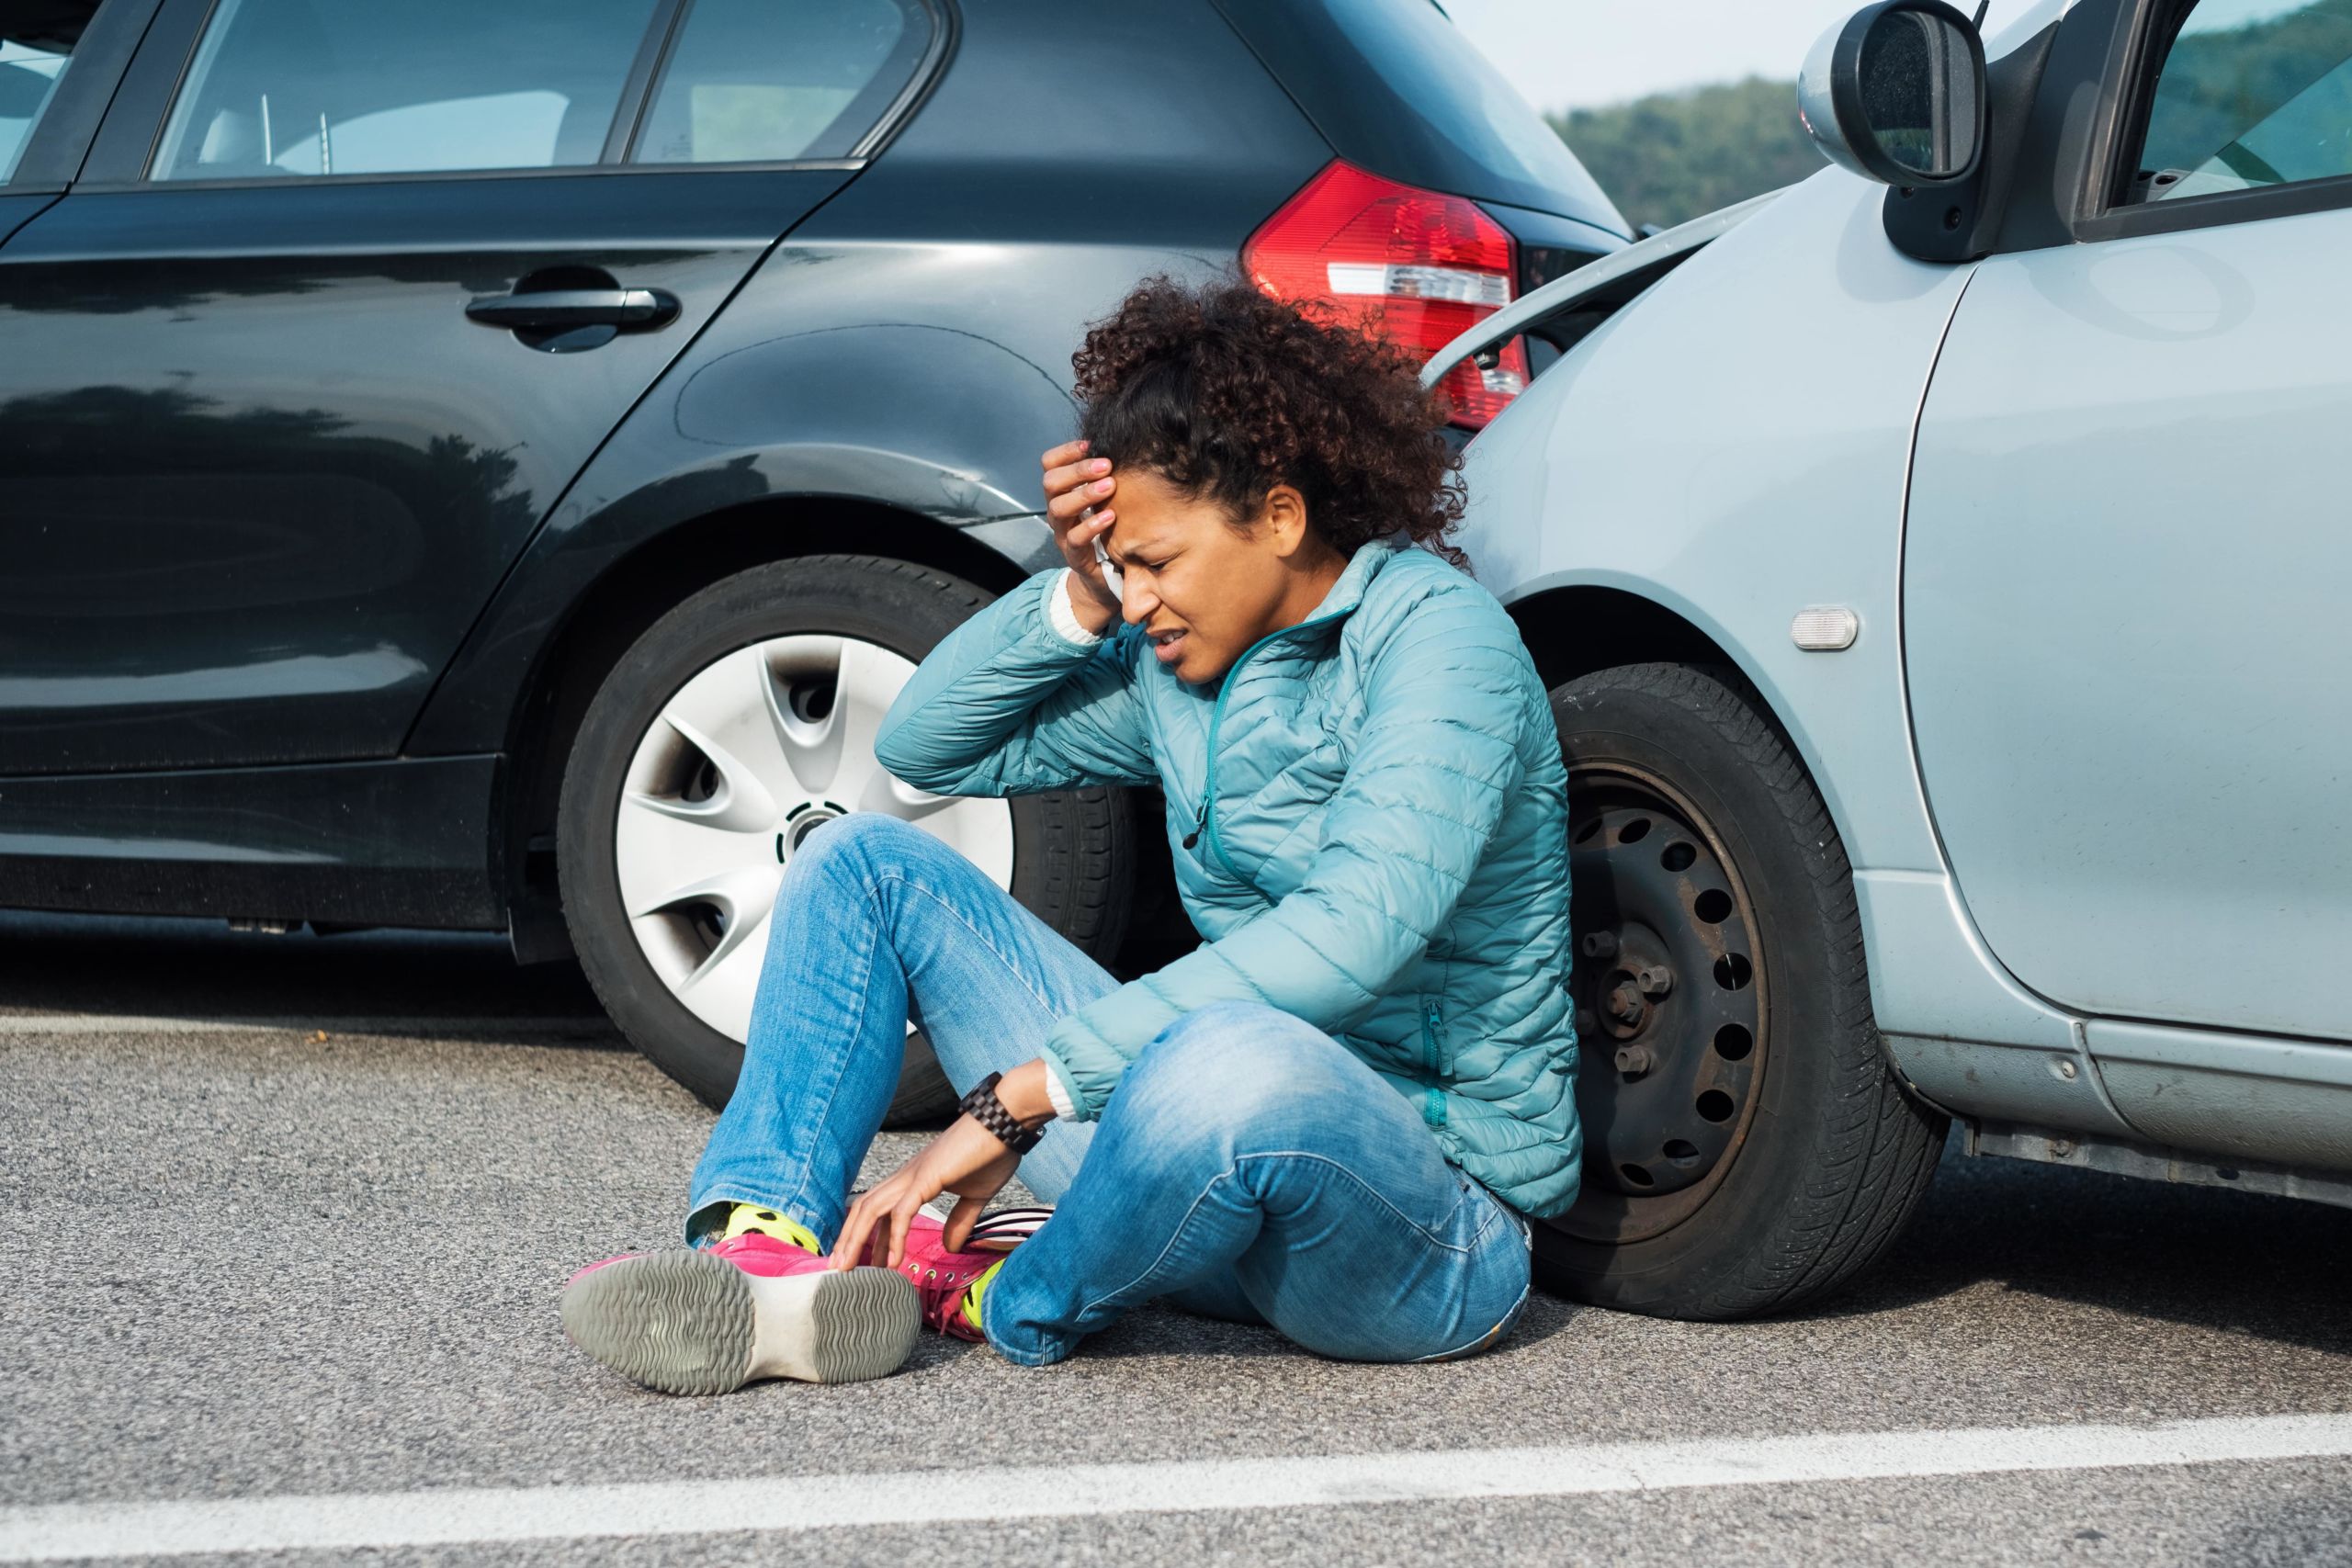 Our Car Accident Post-Concussion Syndrome Attorneys in Florida work hard to recover full economic compensation for Post-Concussion Syndrome and accident injuries.